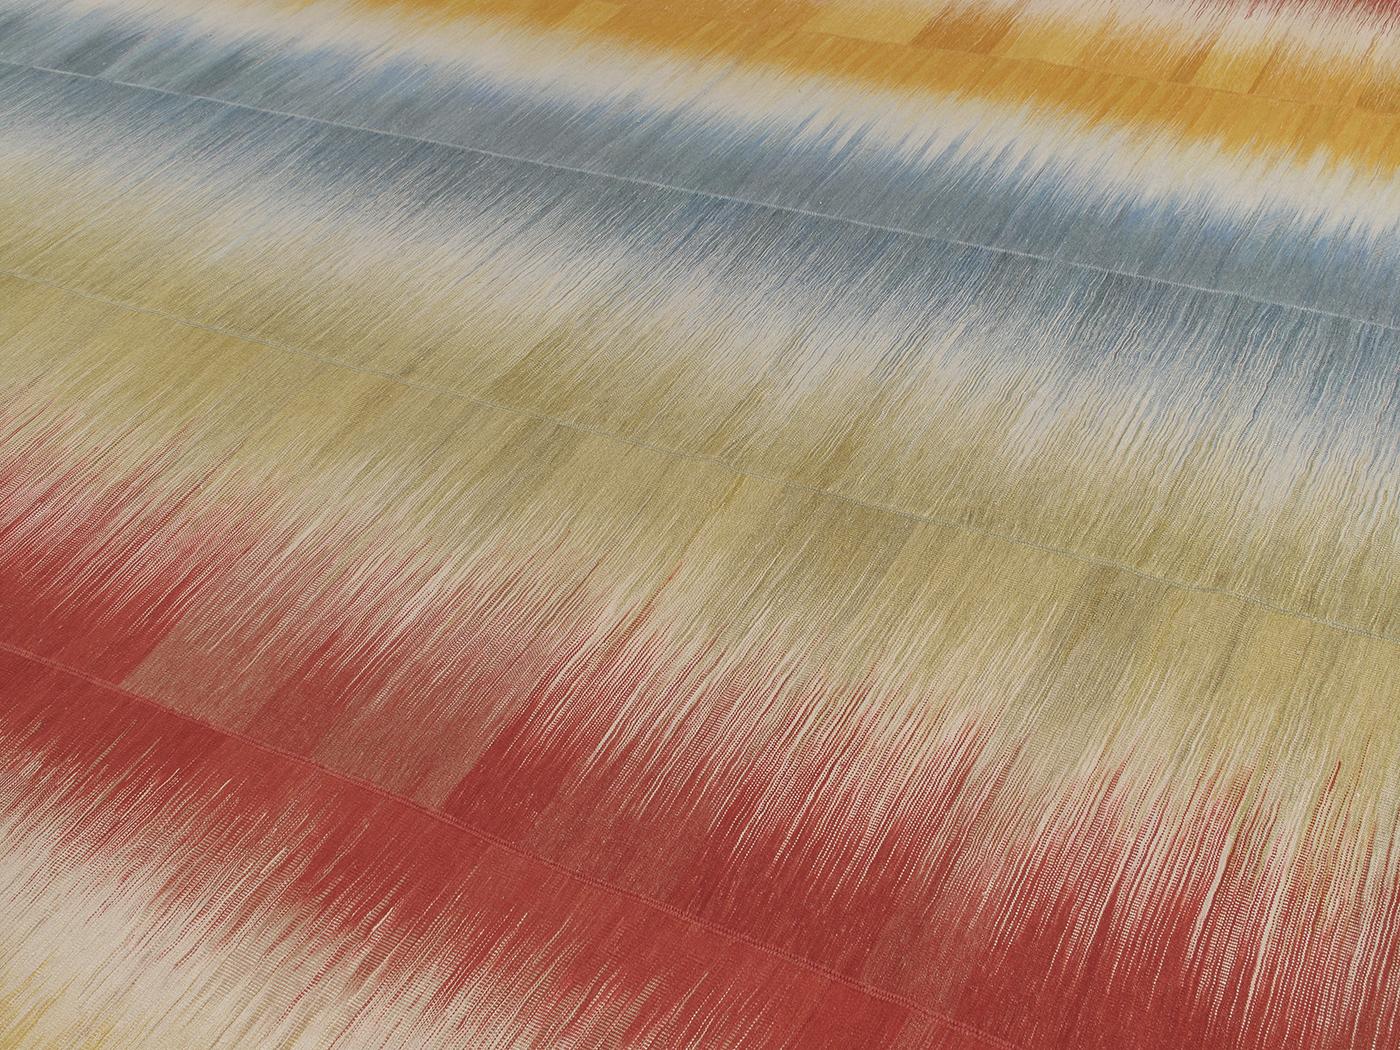 Made from the finest hand-spun wool, our Mazandaran collection highlights the Minimalist sophistication that existed long before the modern era. The collection was inspired by the kilims that were woven by Persian women in the Mazandaran Province in